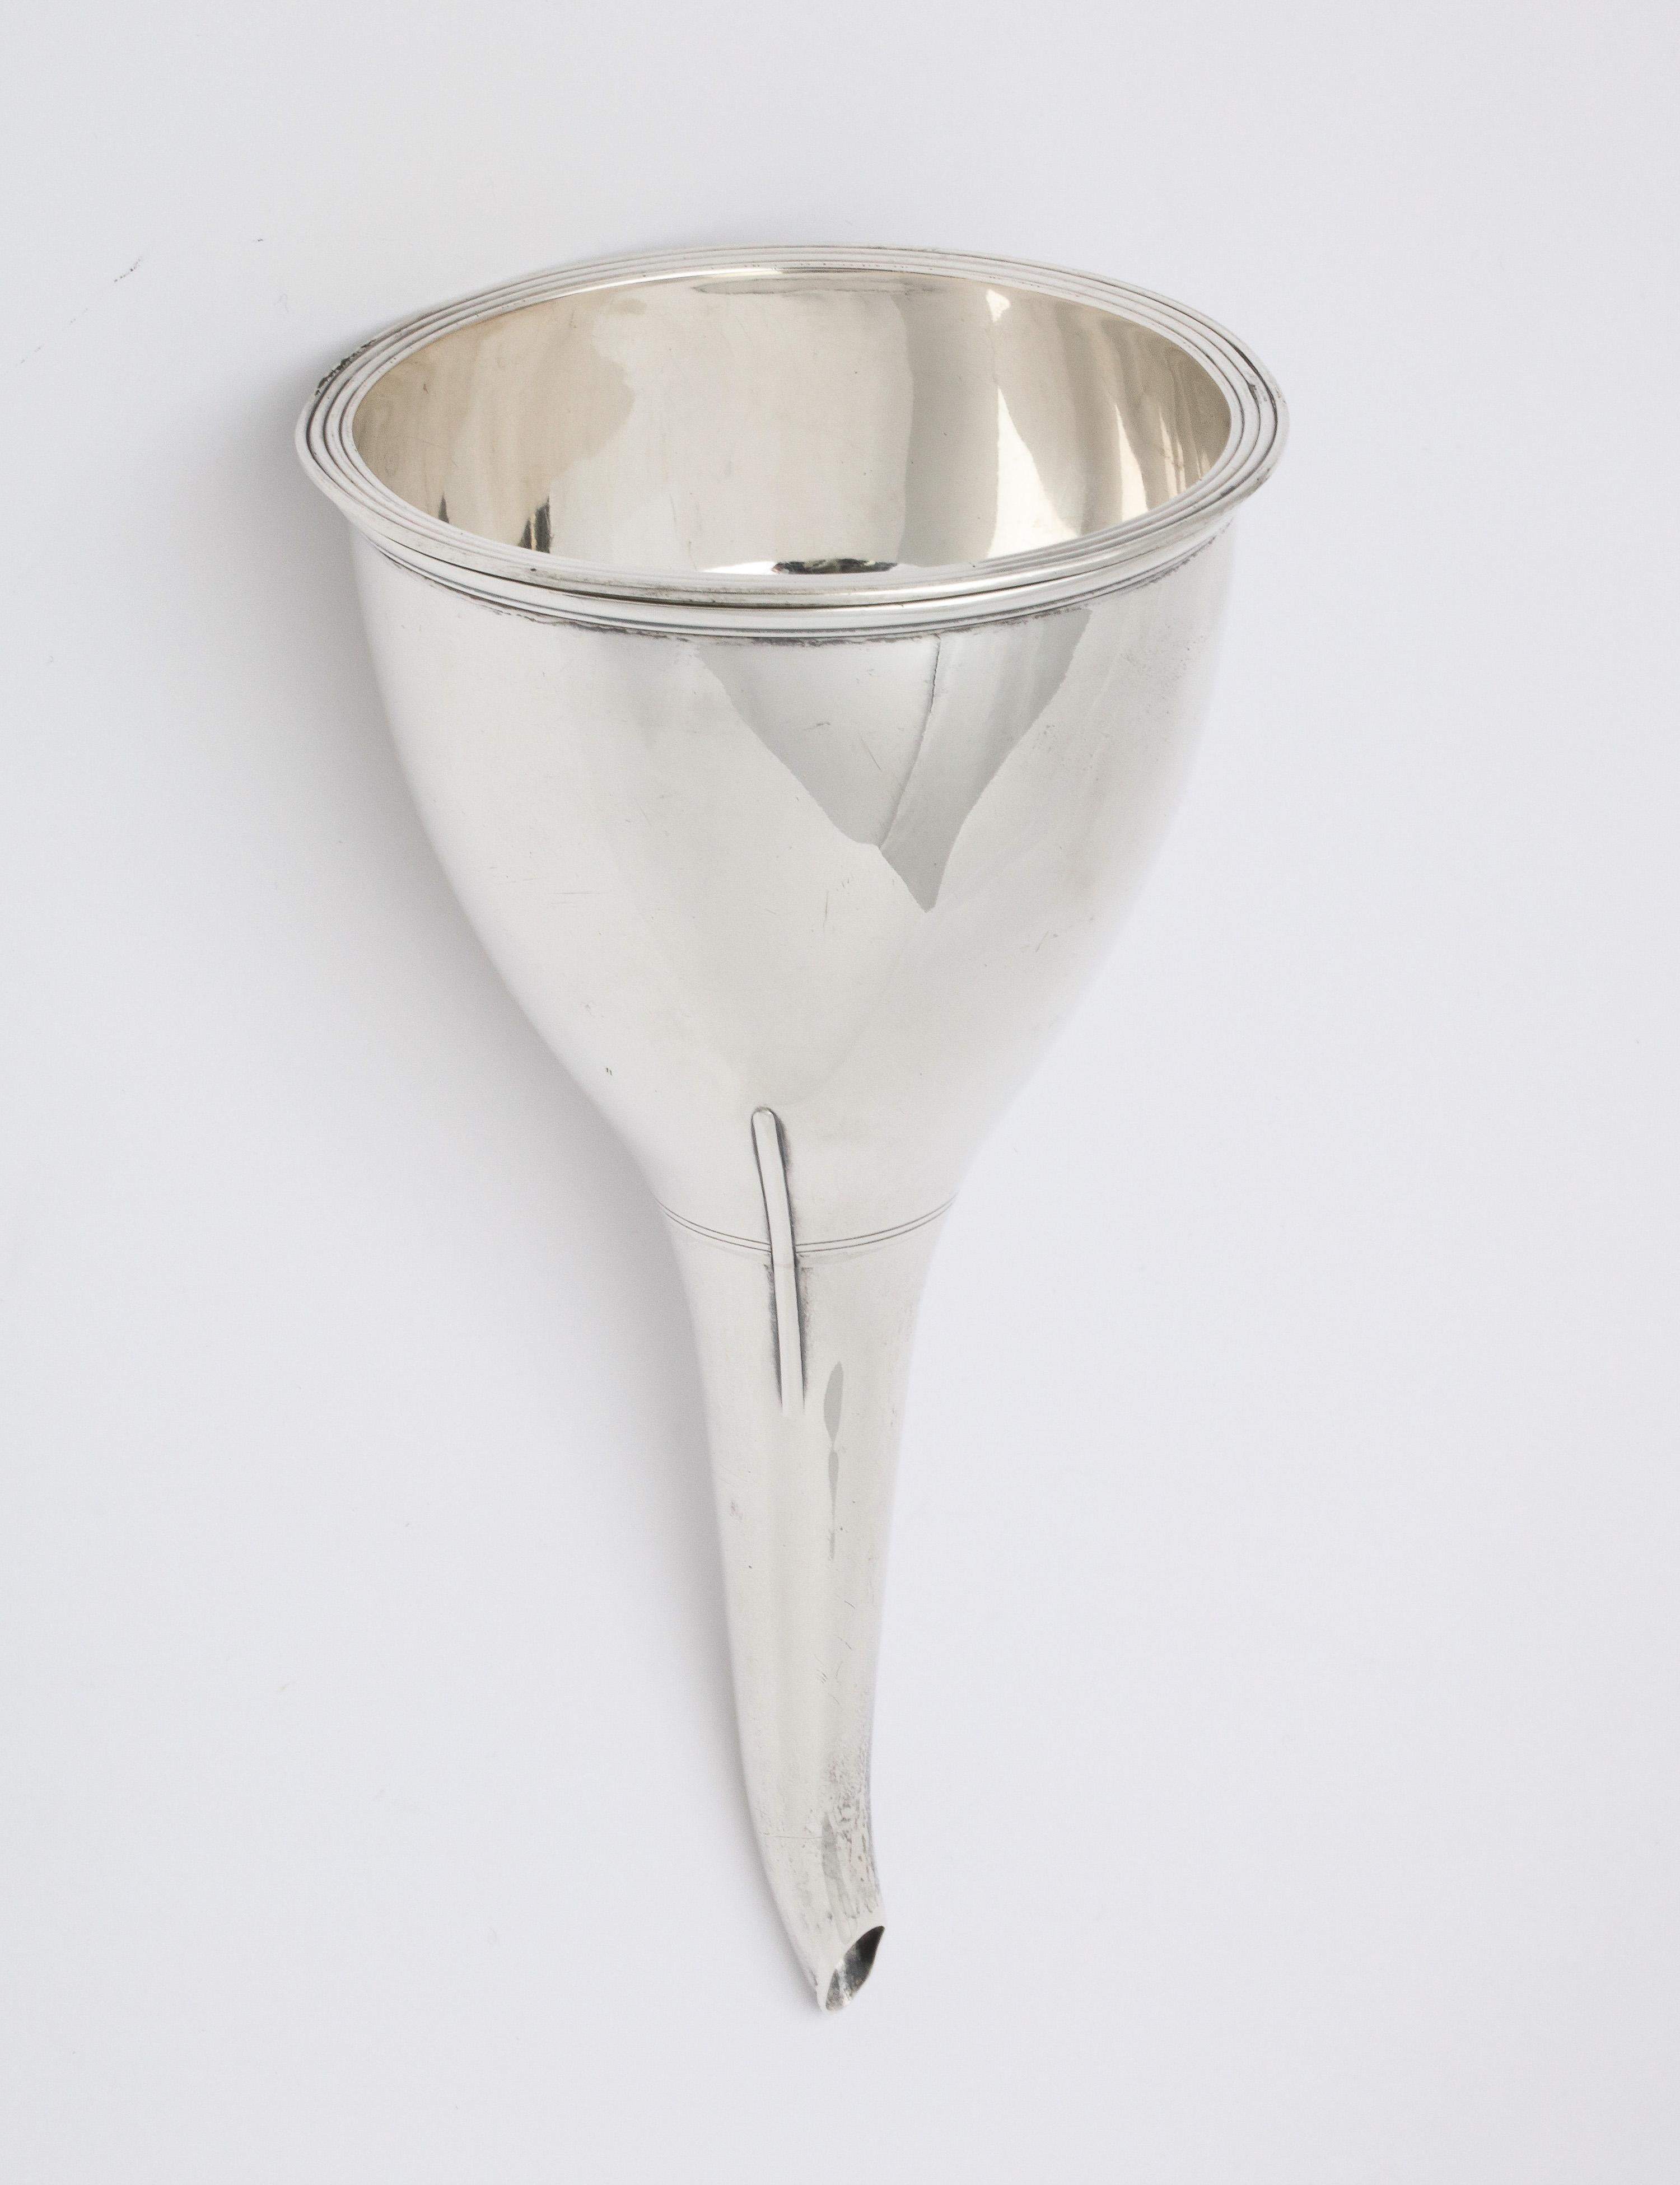 Georgian (George III) Period, sterling silver wine funnel, London, England, year - hallmarked for 1818, William Bateman - Maker. Measures 6 1/2 inches high to top of spout x 3 1/4 inches diameter at widest point. Separates into three sections (see